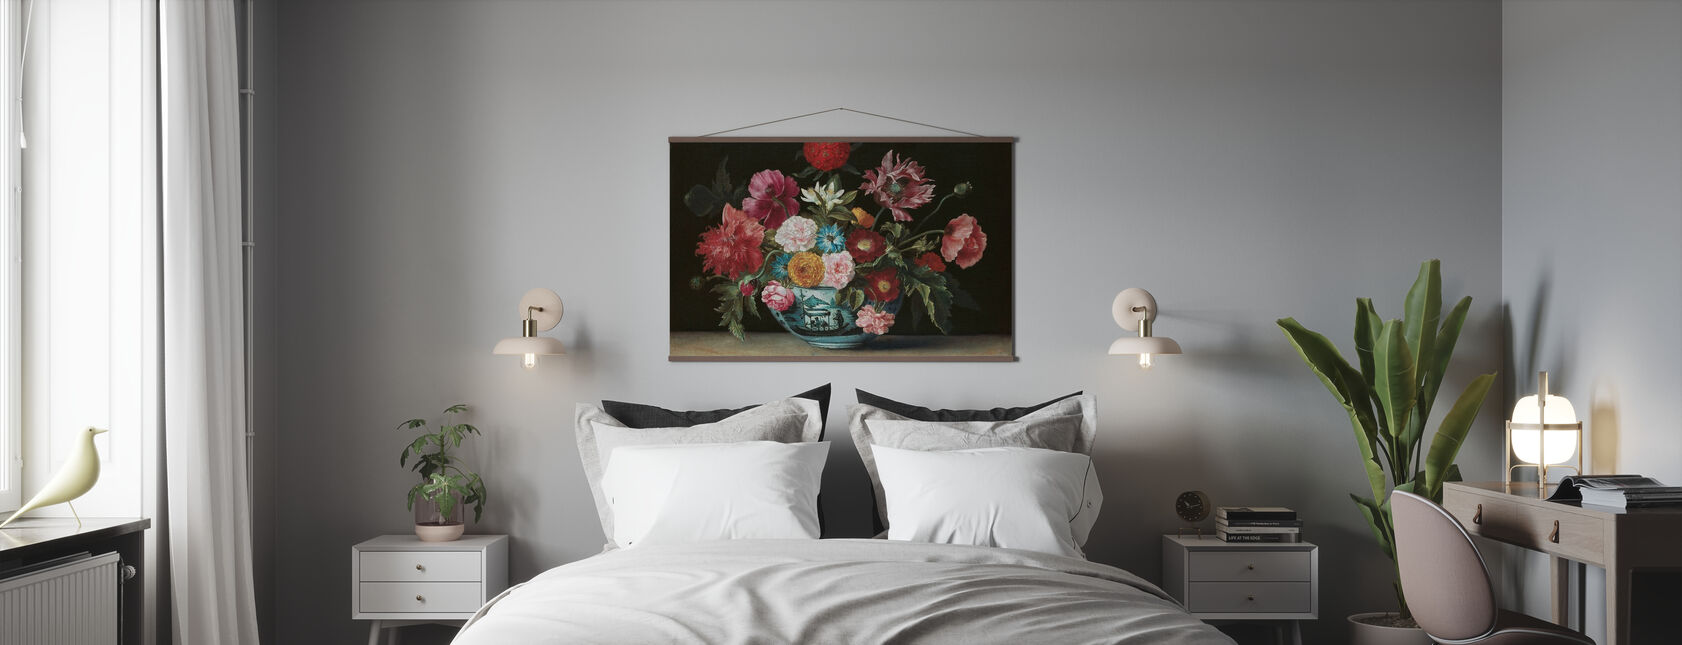 Chinese Bowl with Flowers - Jacques Linard - Poster - Bedroom